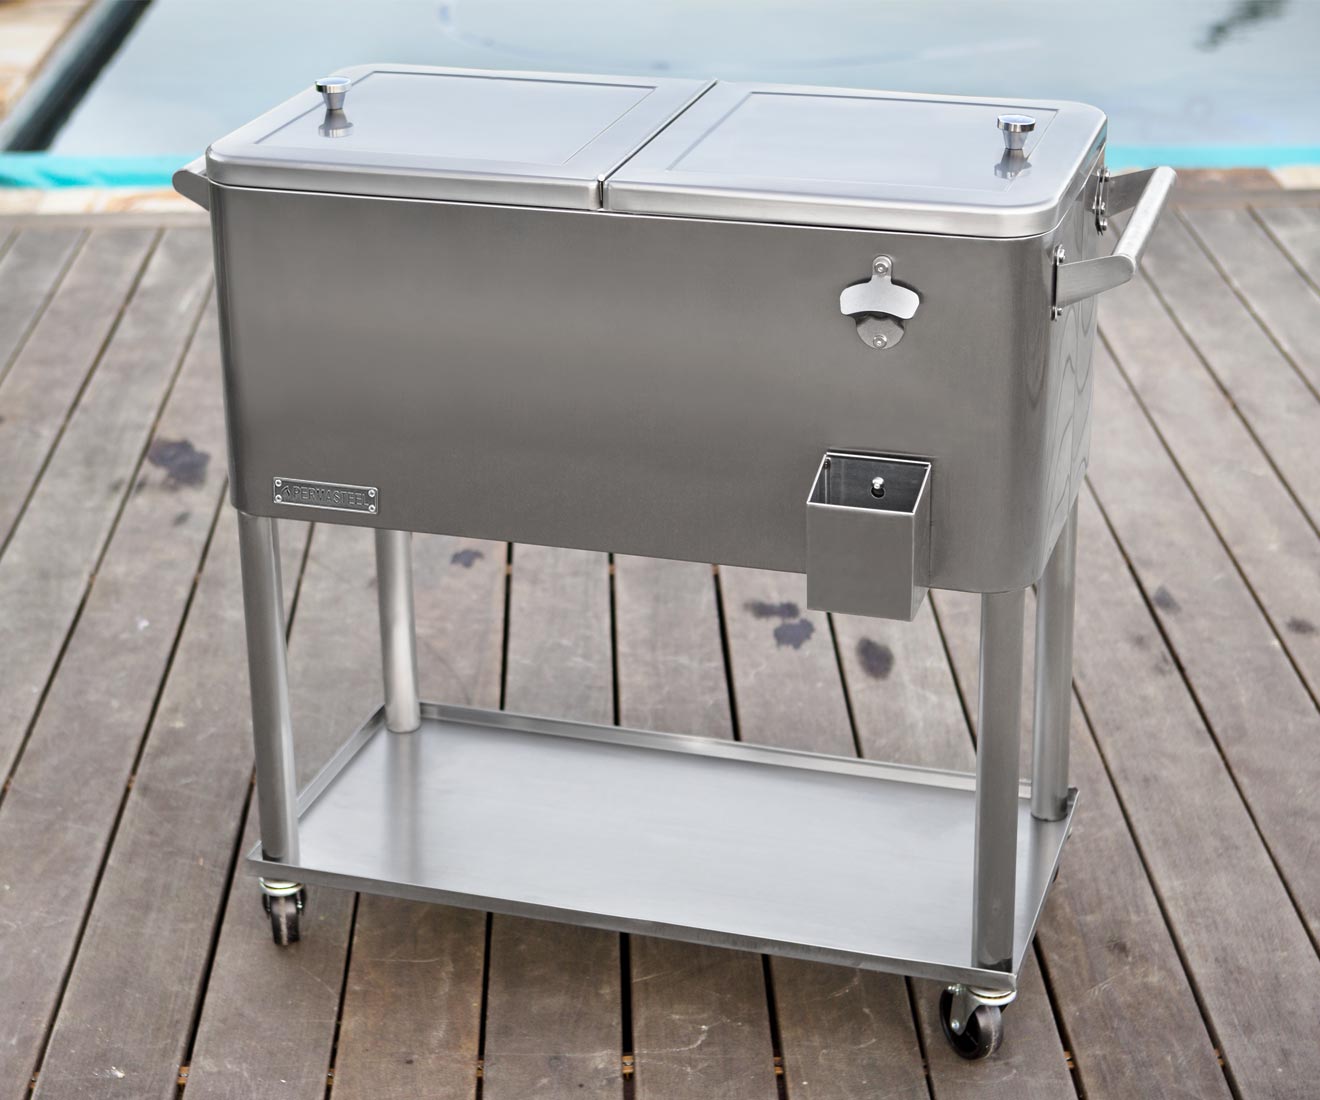 Permasteel 80 Qt Stainless Steel Patio Cooler in Outdoor Lifestyle Living Setting Environment